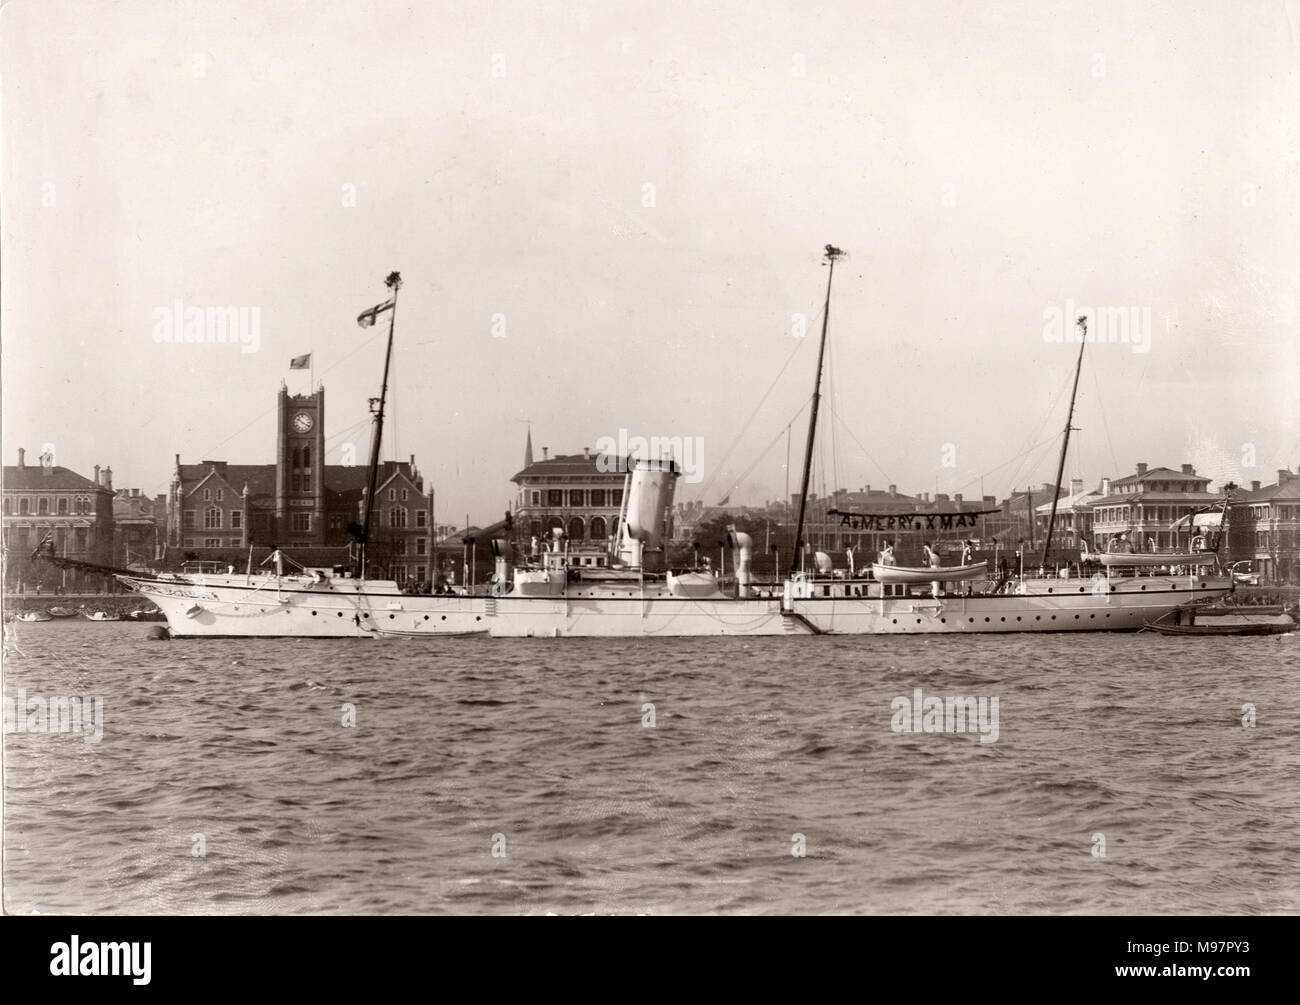 Vintage Photograph China c.1900 - Boxer rebellion or uprising, Yihetuan Movement - image from an album of a British soldier who took part of the supression of the uprising - Admirals yacht - HMA Alacrity off Shanghai Stock Photo